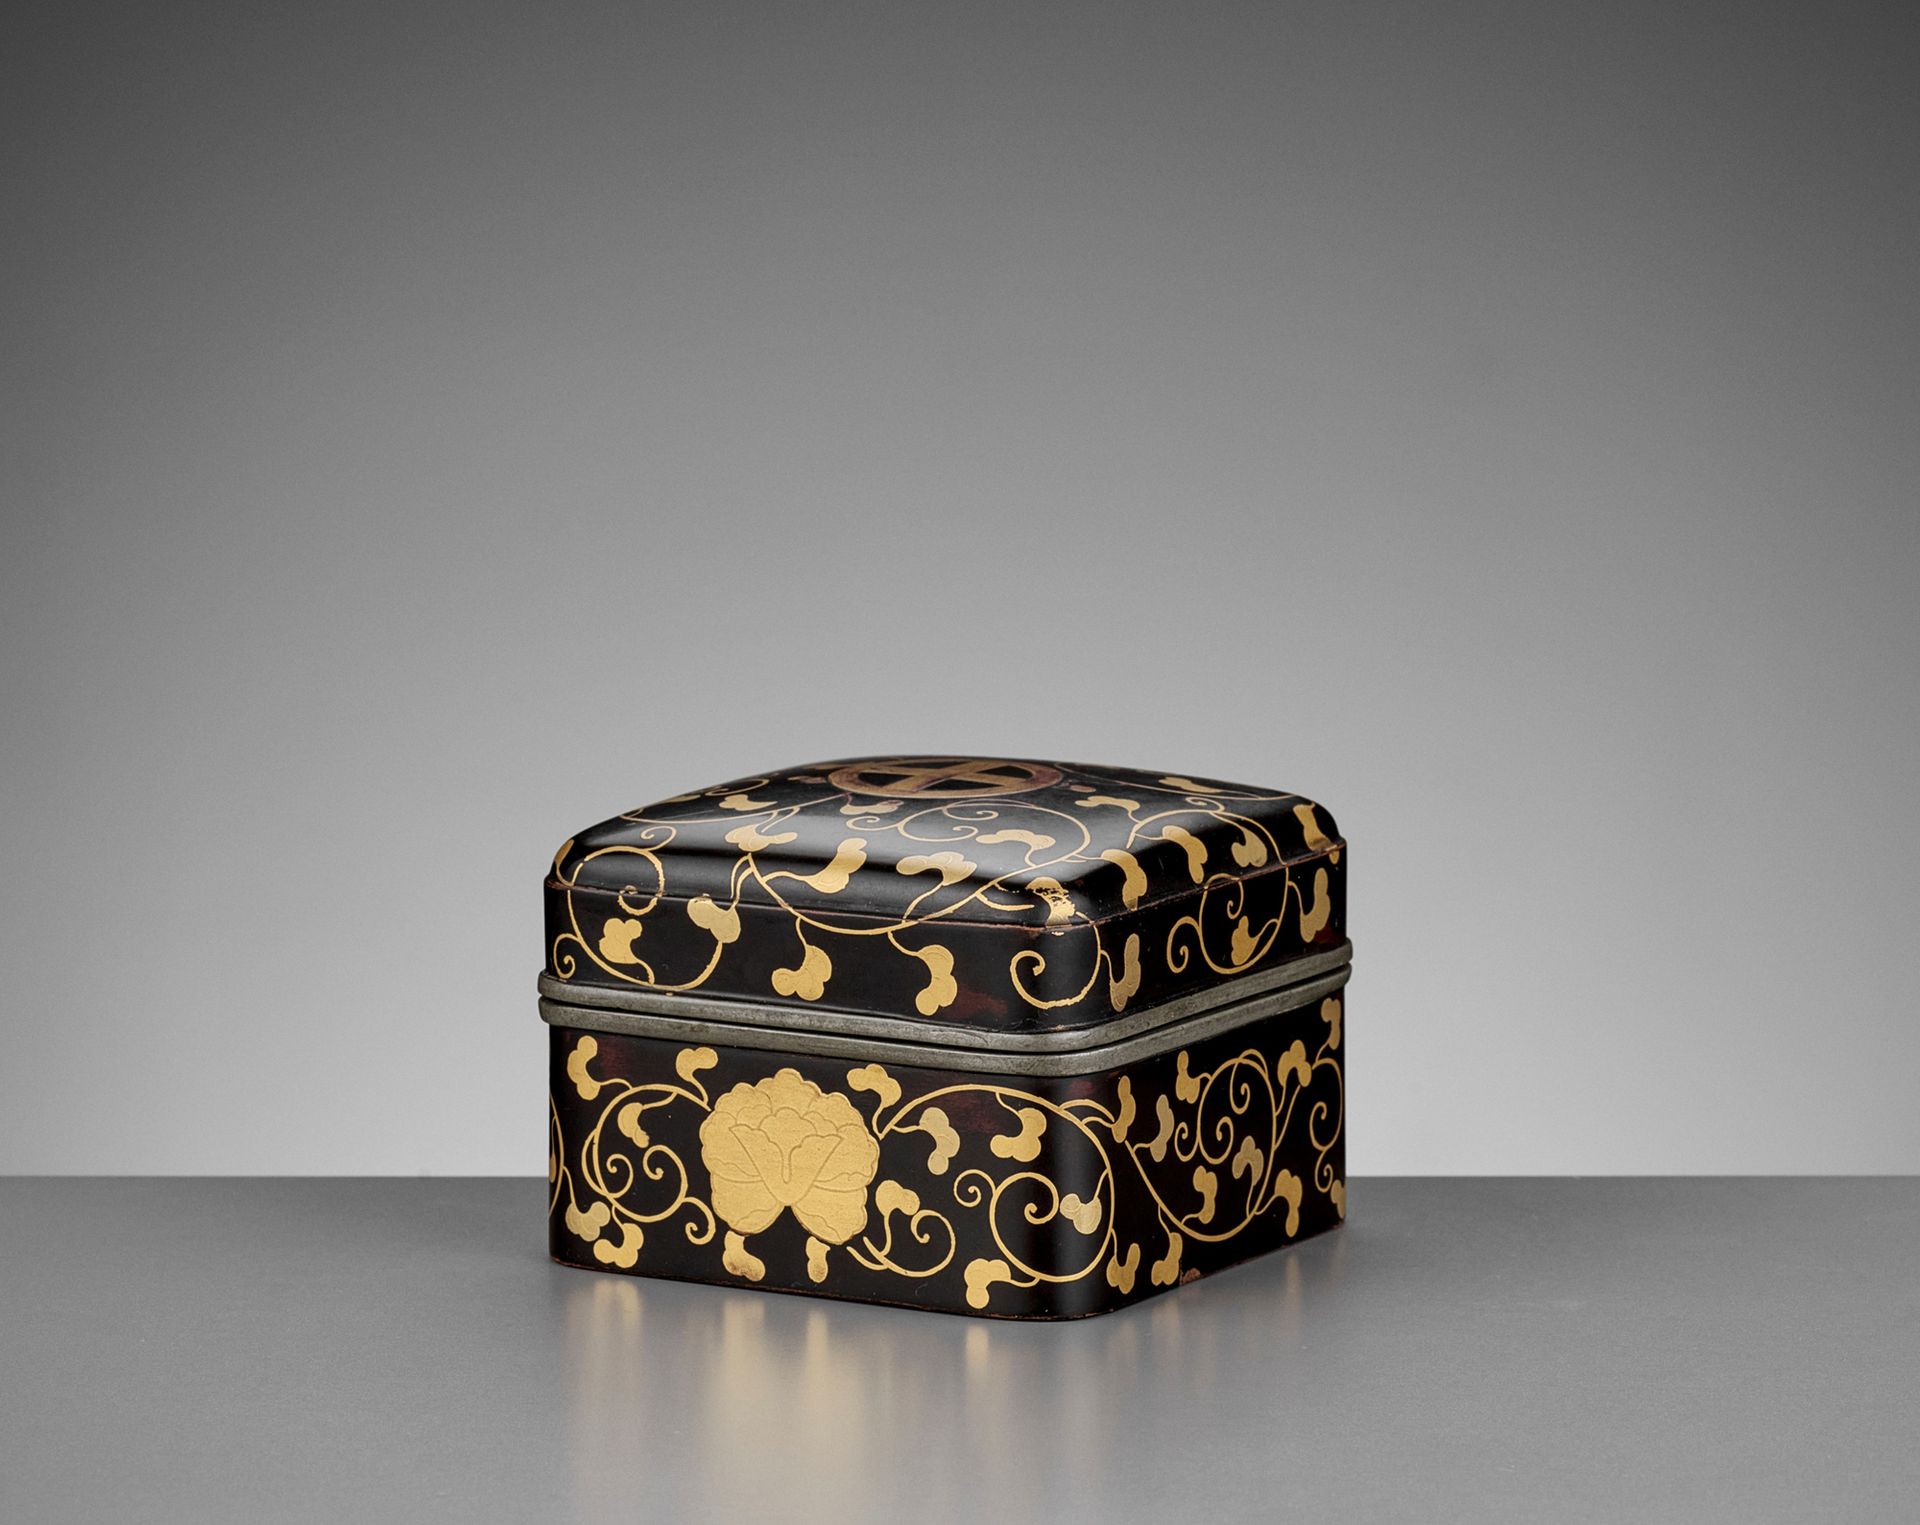 A RARE BLACK AND GOLD-LACQUERED KOBAKO AND COVER WITH SHIMAZU MONS 罕见的黑金漆岛津门小盒及盖&hellip;